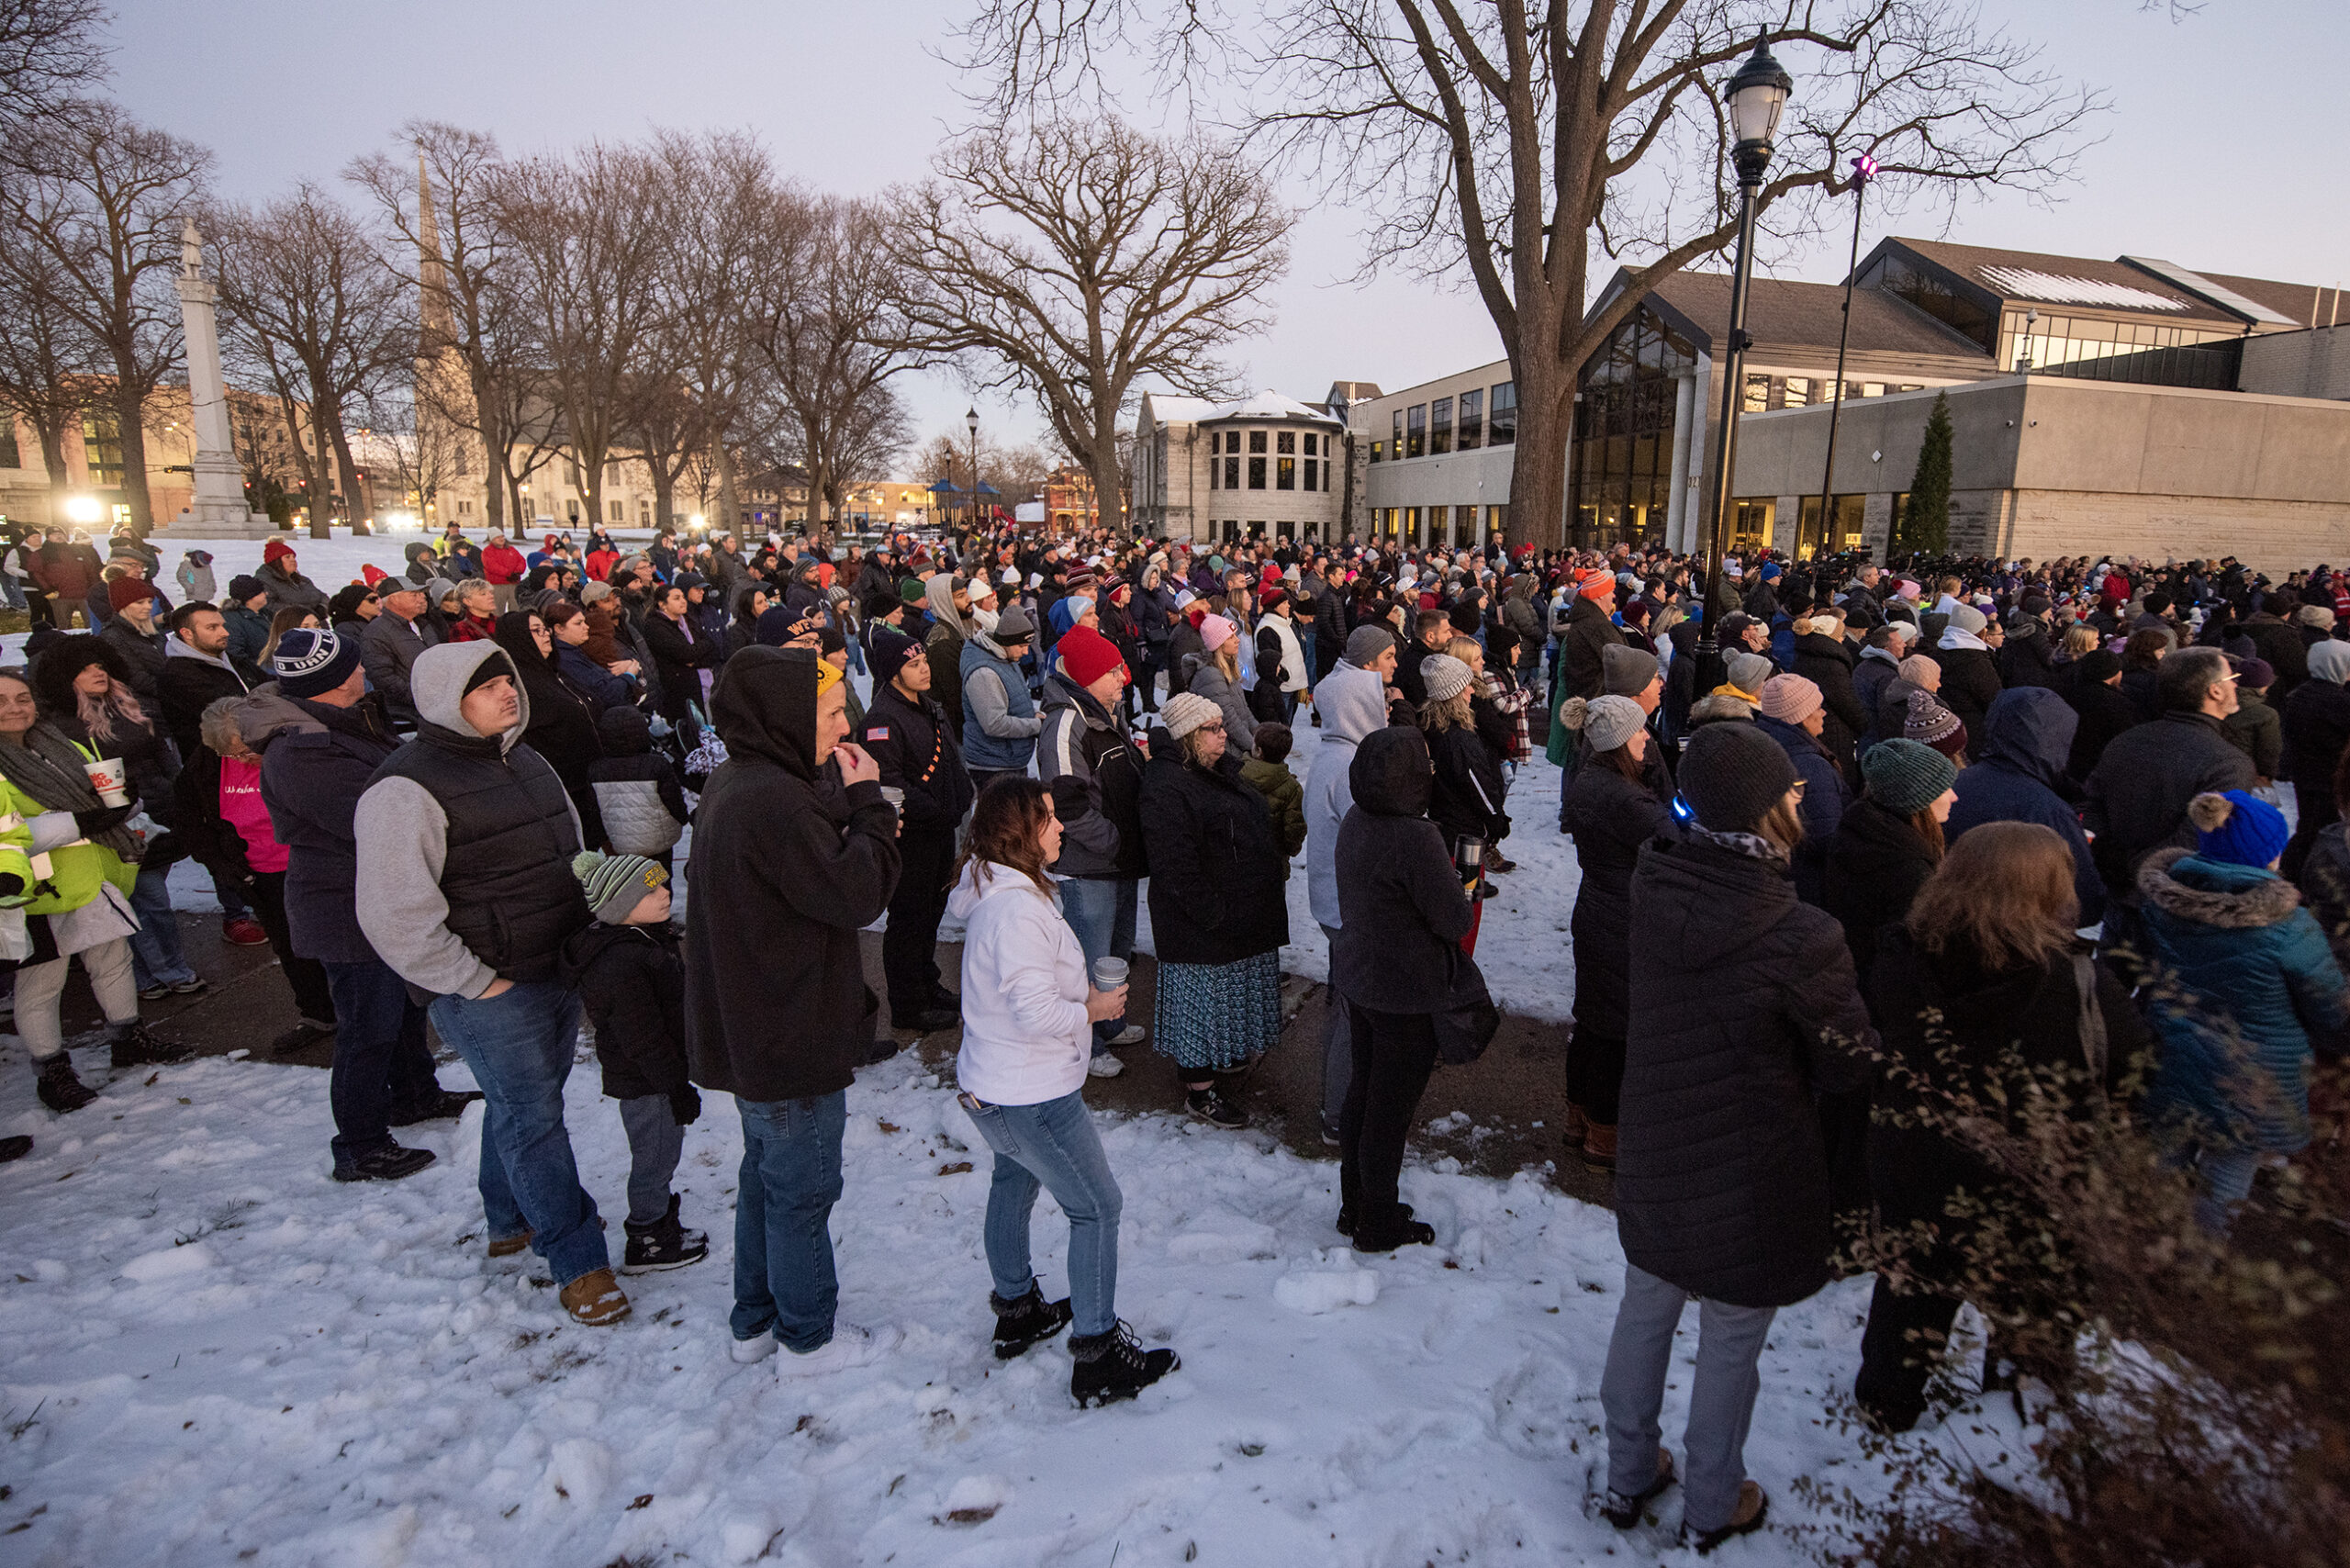 A crowd of people stand together in a park.